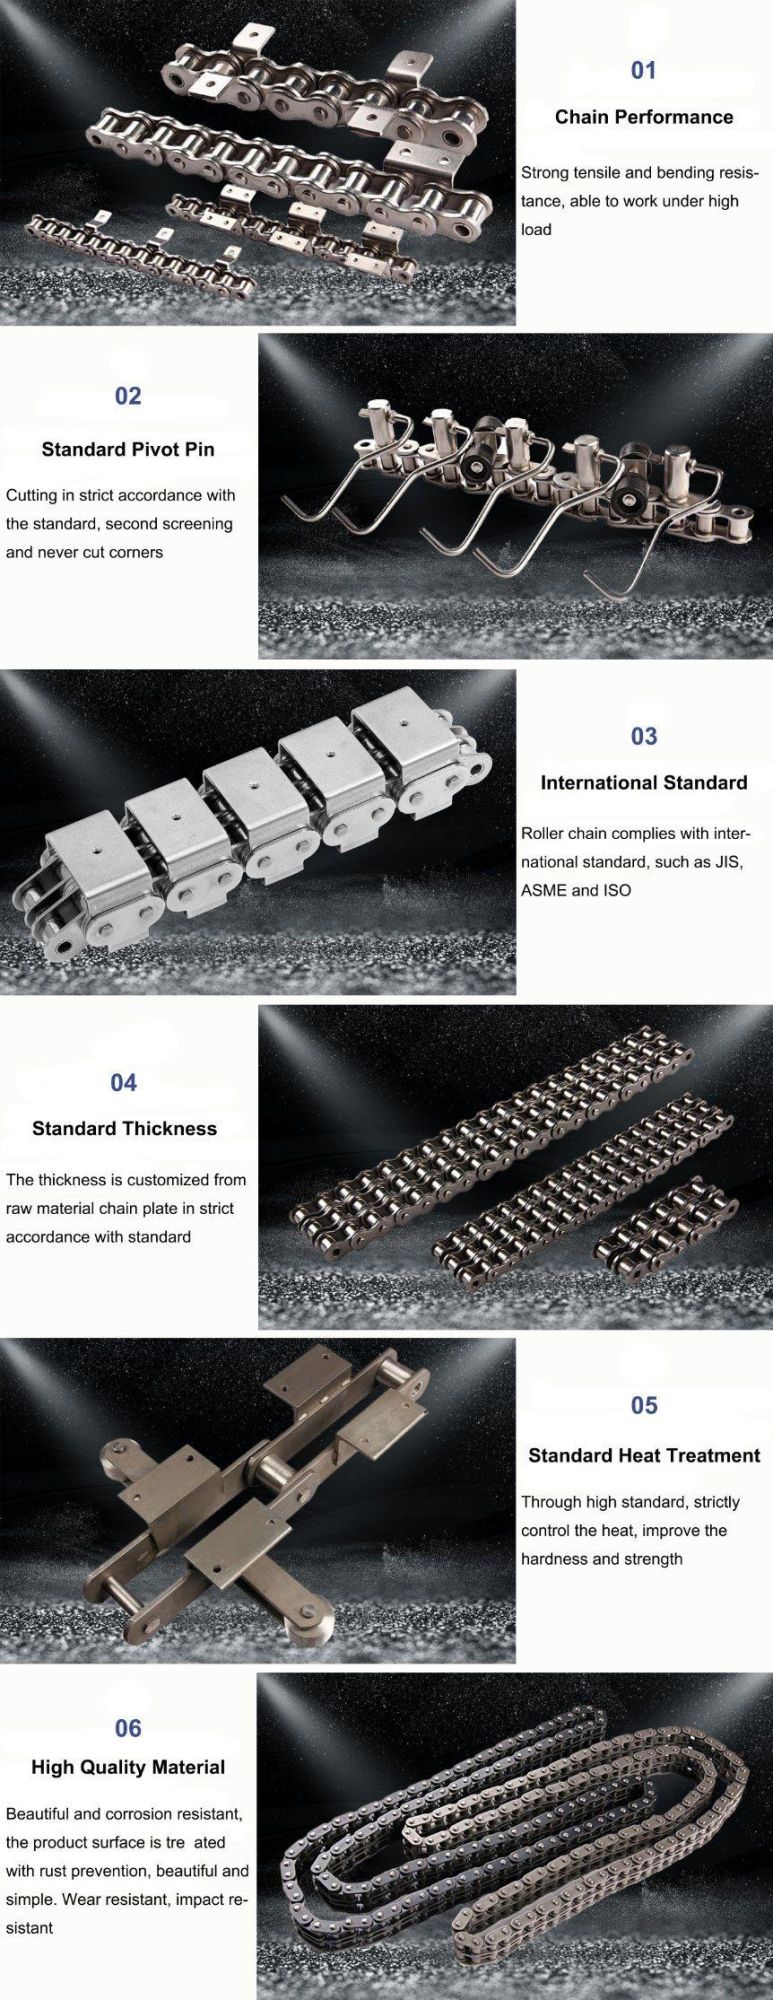 Wear Resistance Corrosion Resistance Stainless Steel Sleeve Type Chain HSS4124 W152